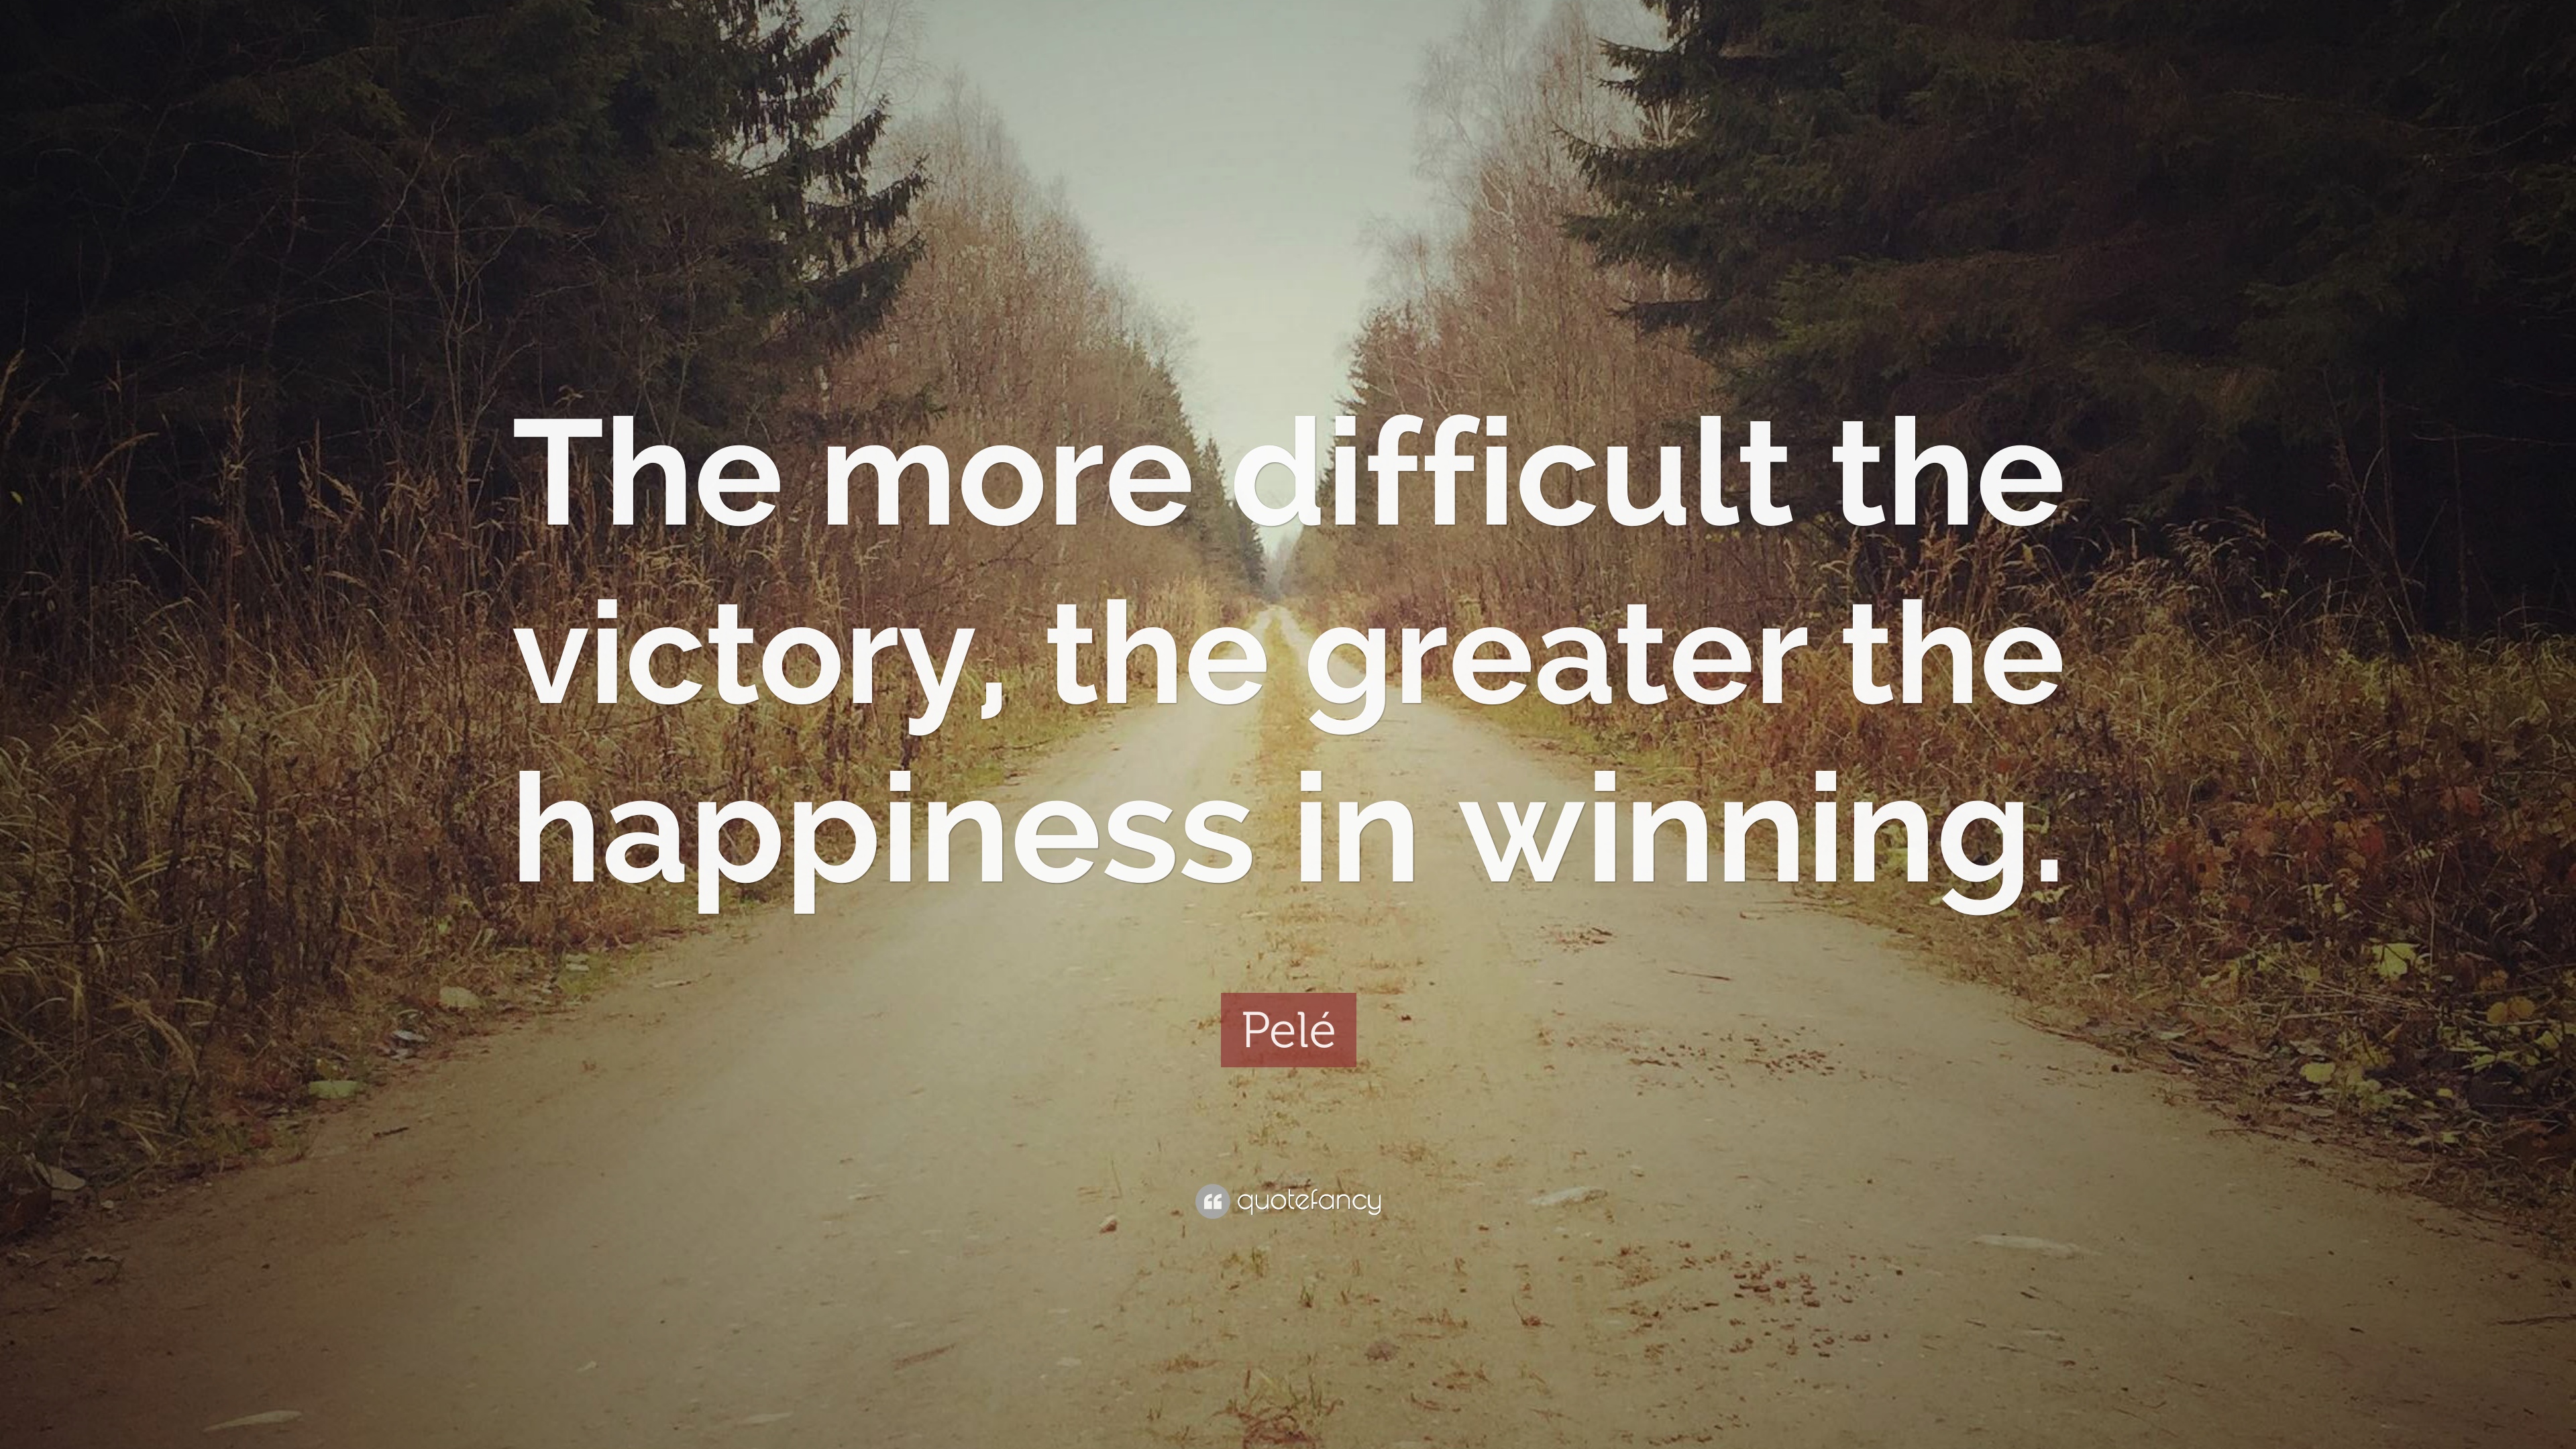 the more difficult the victory, the greater the happiness in winning. pele